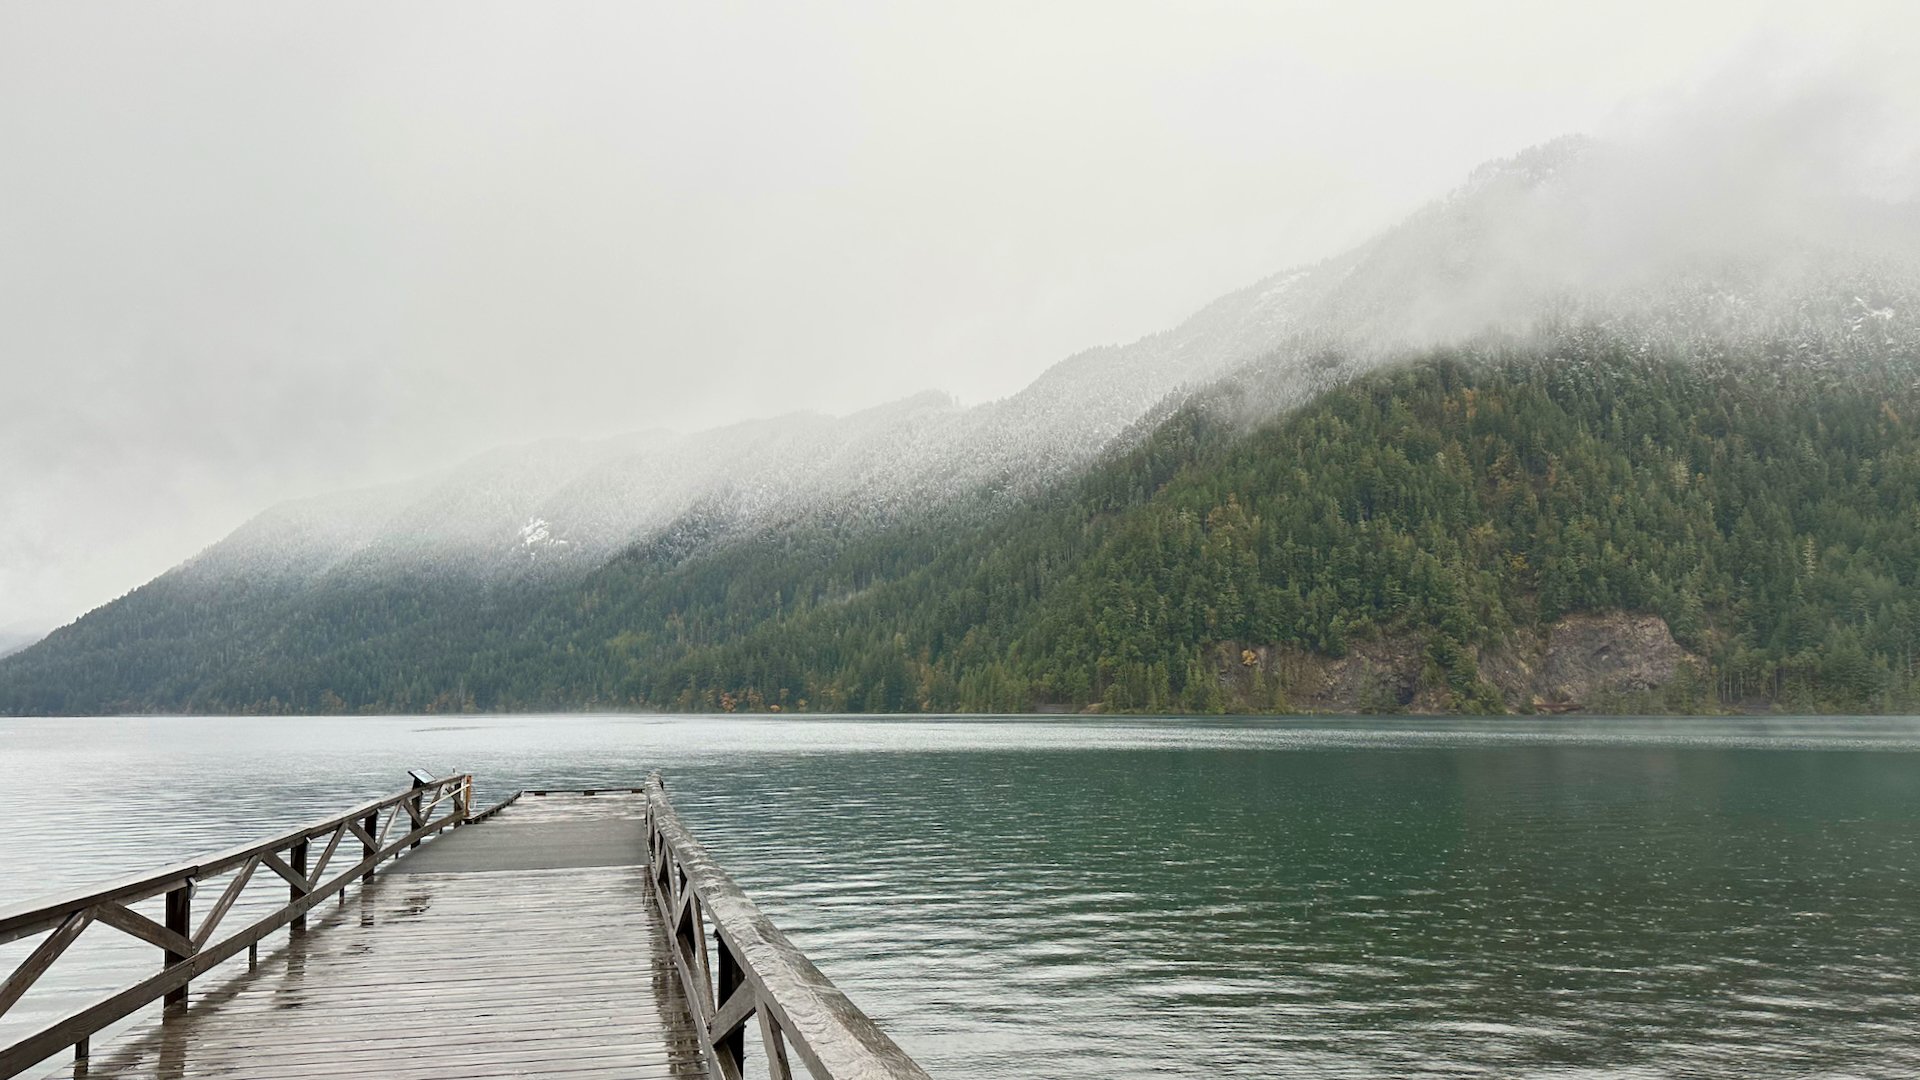  Looking out over the dock, you could see the snow line coming down the mountain on the other side of the lake. 